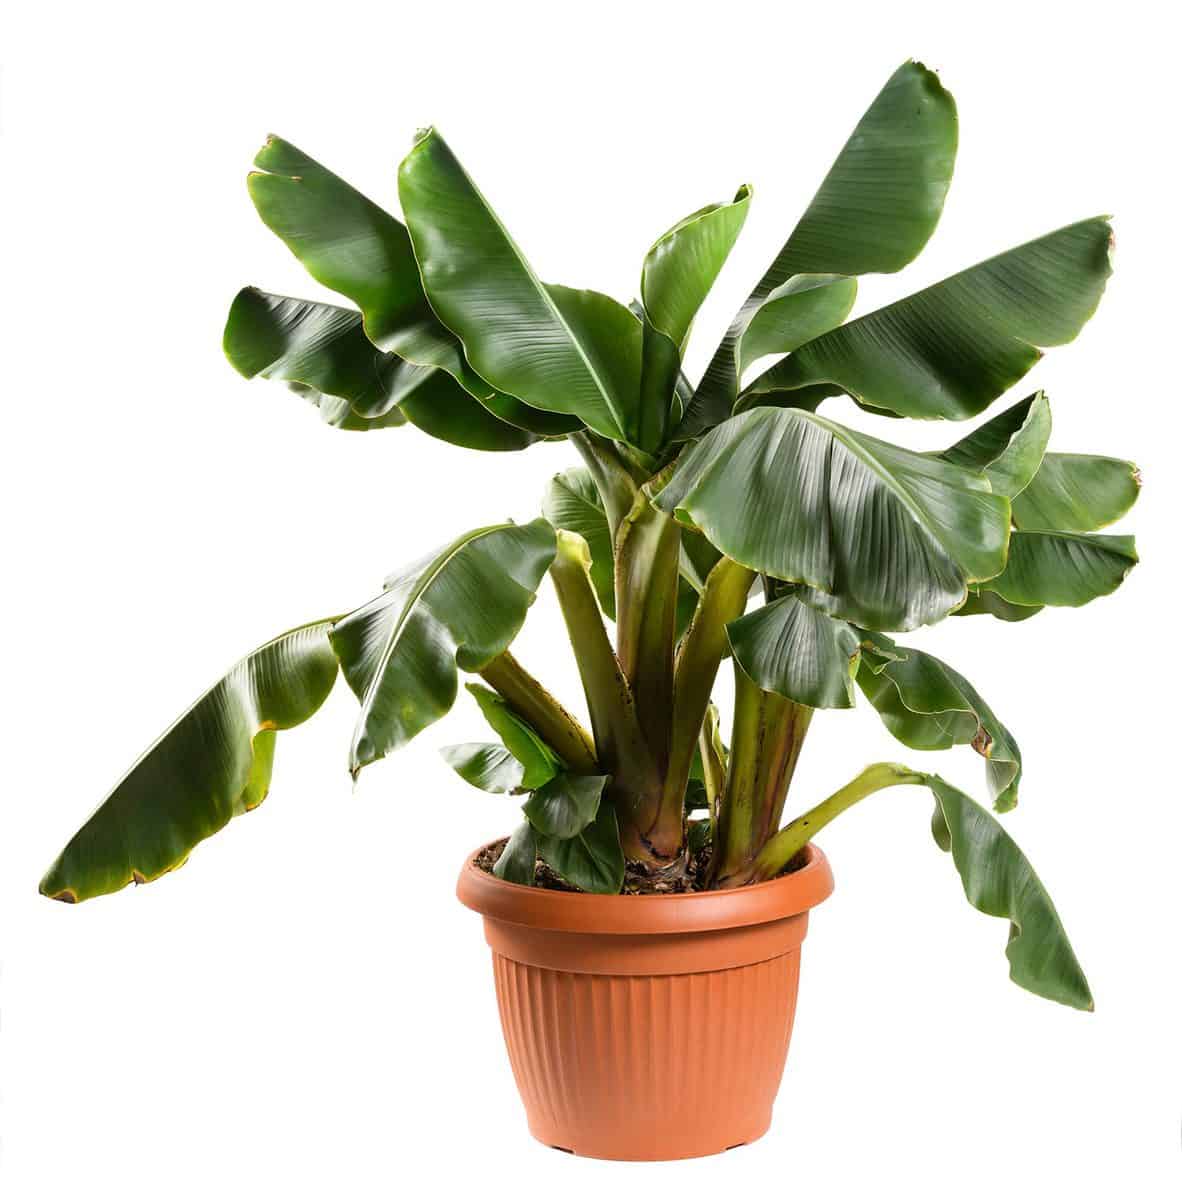 Potted musa acuminata dwarf banana plant with ornamental green fronds